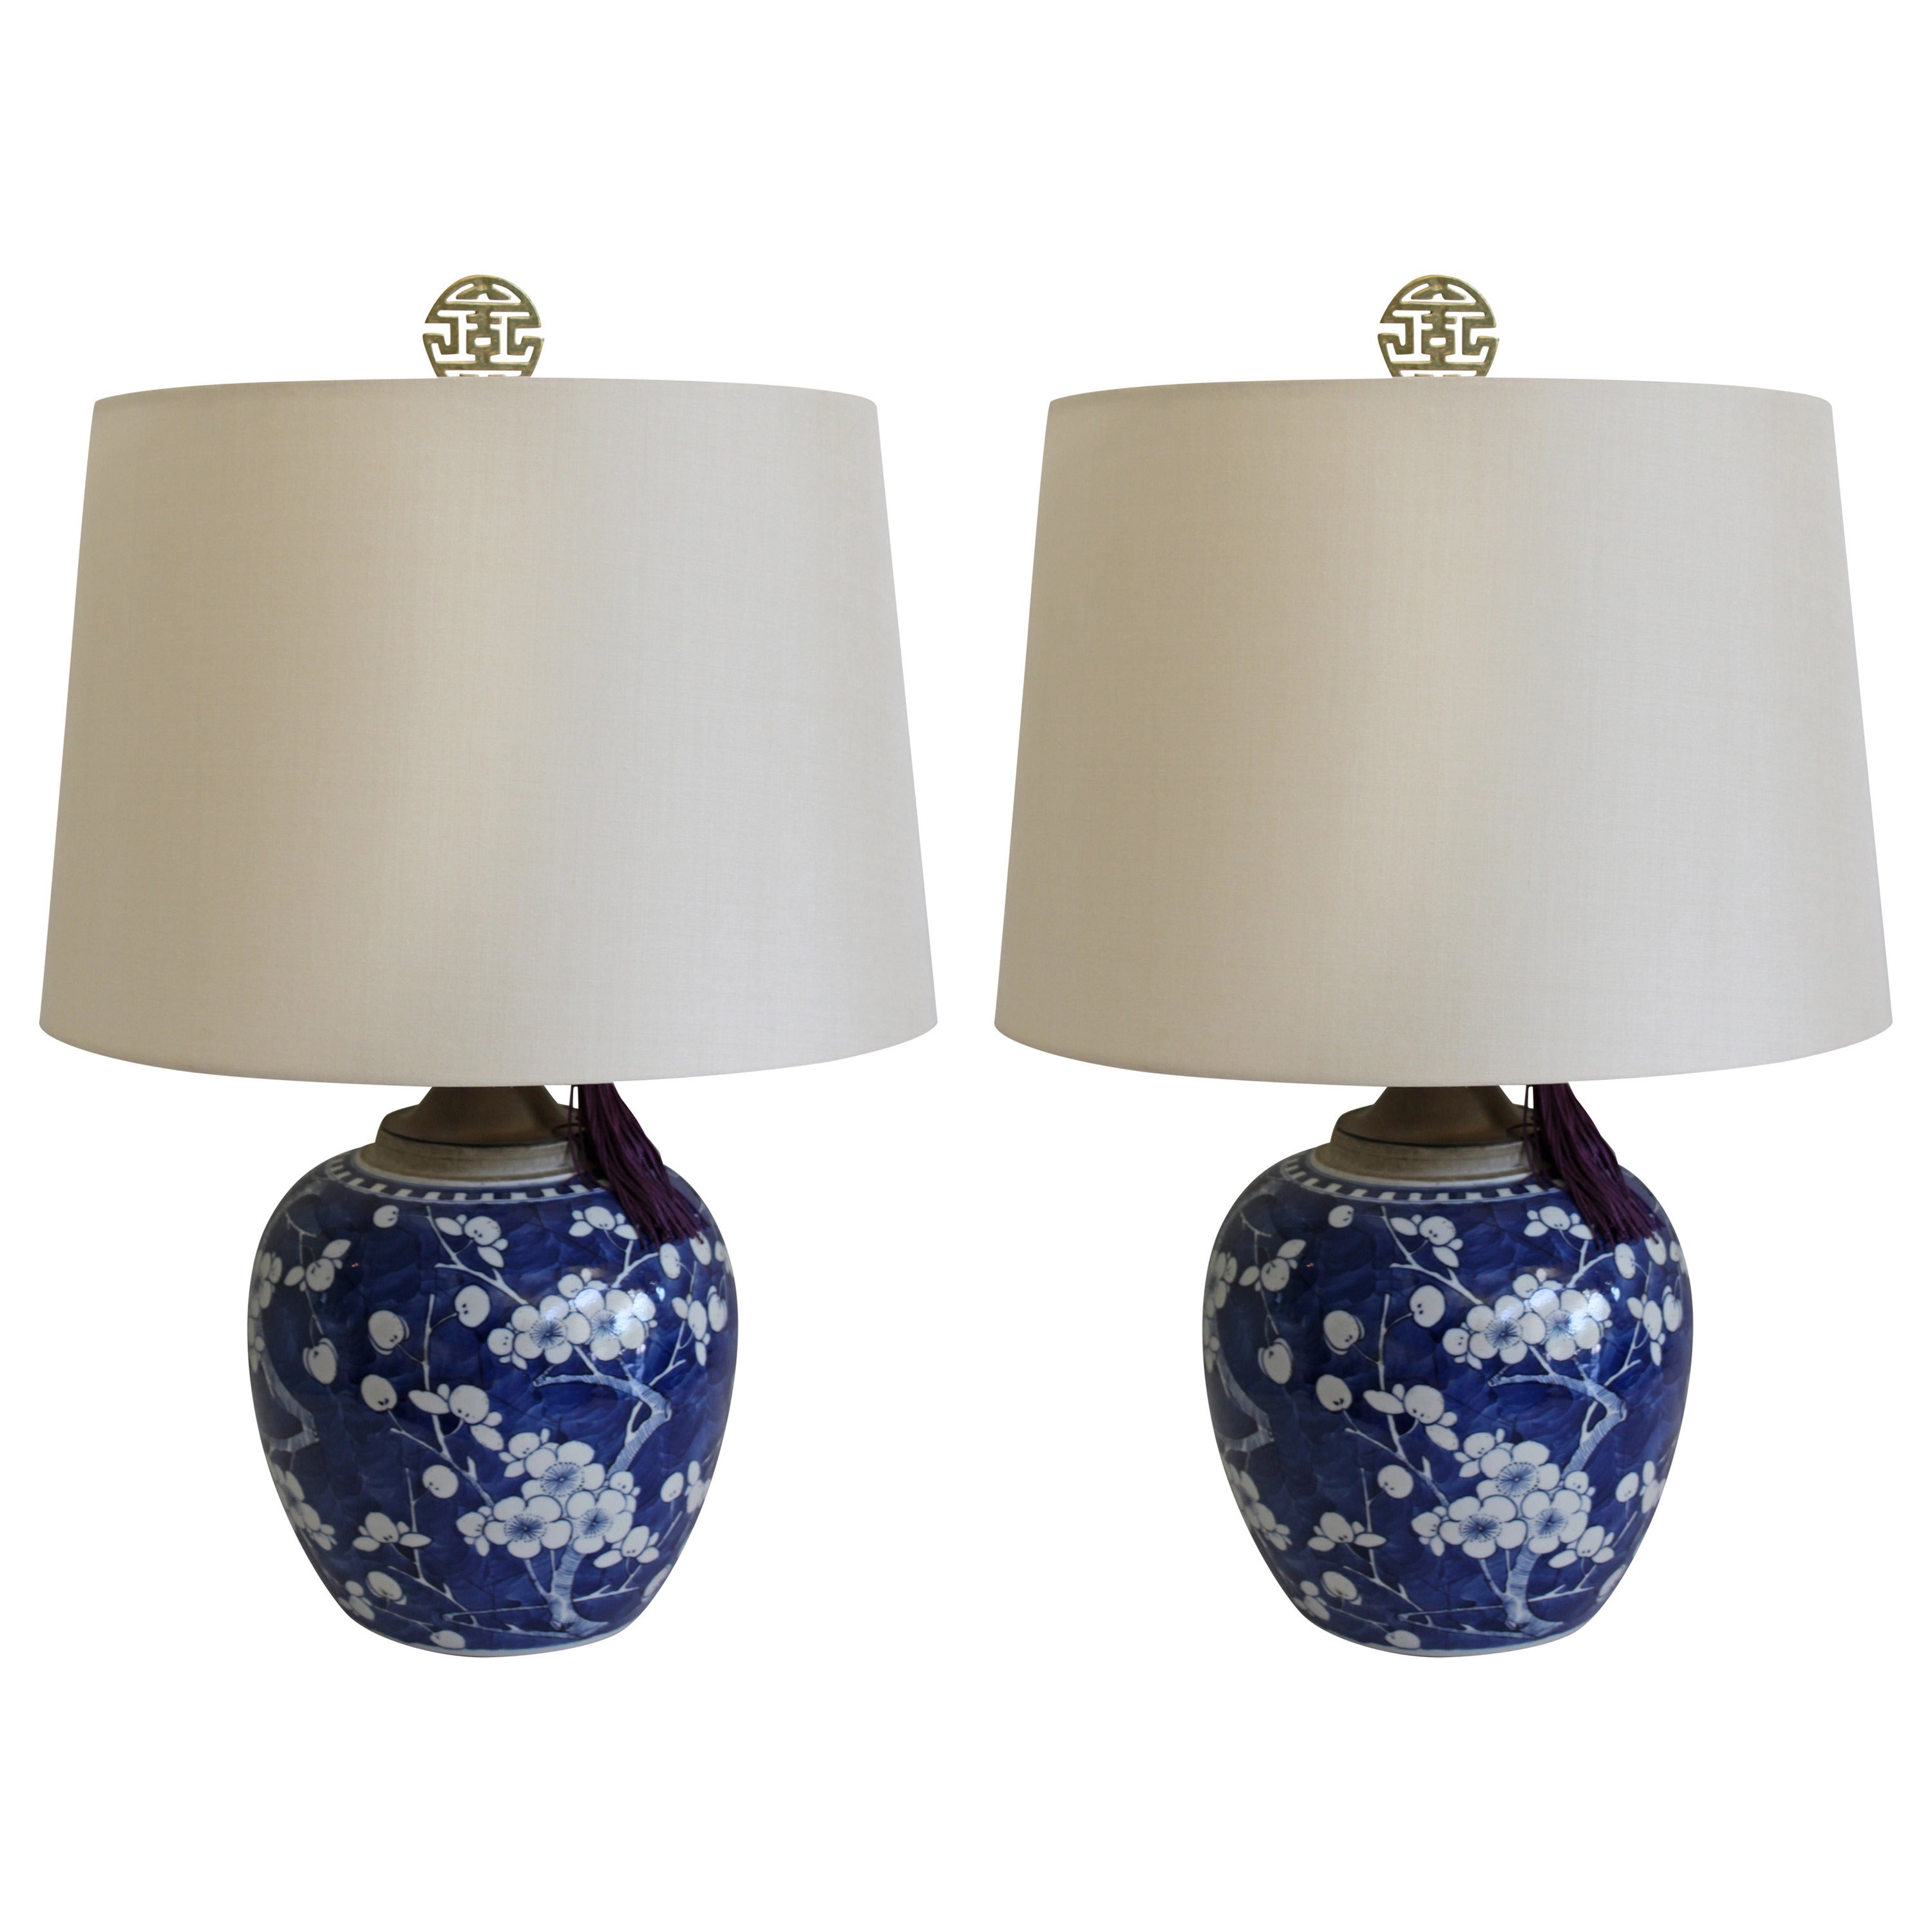 Pair of Blue and White Chinese Ginger Jar Lamps